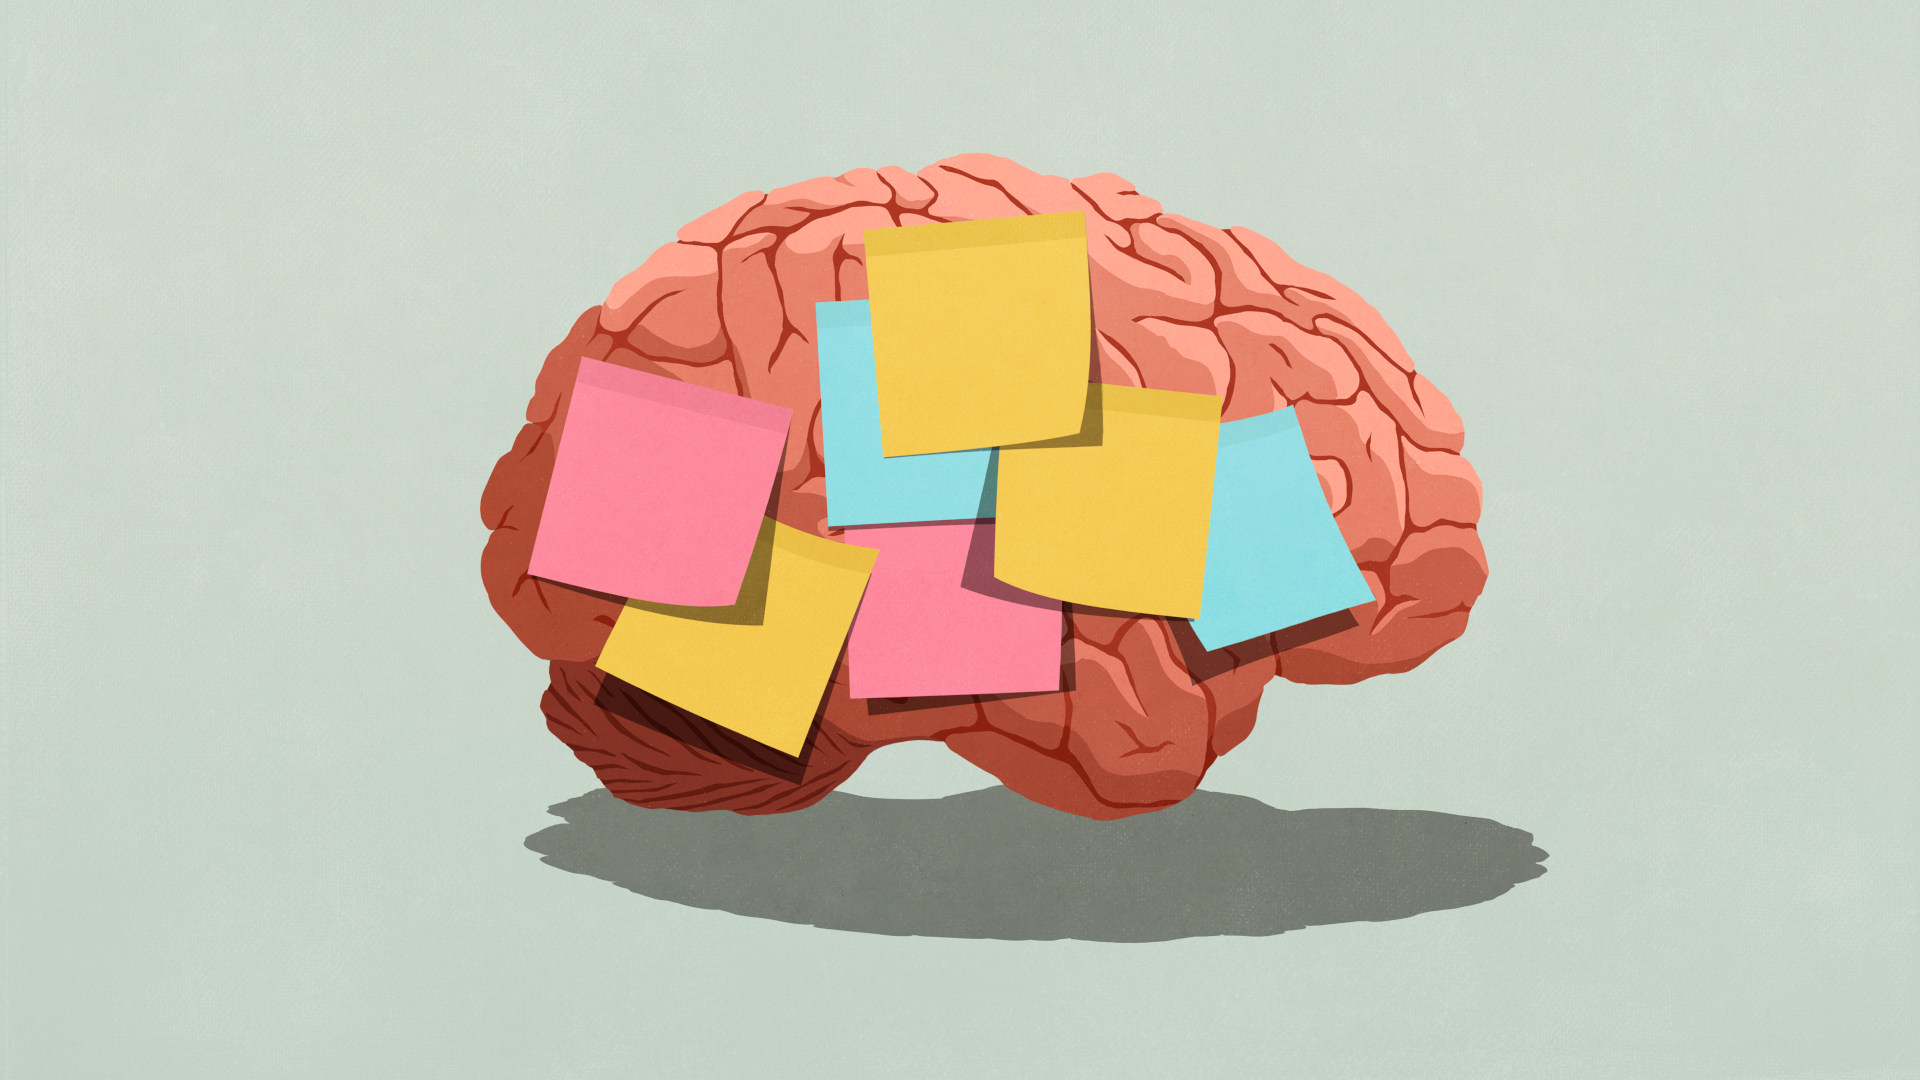 Illustration of colorful adhesive notes covering a brain